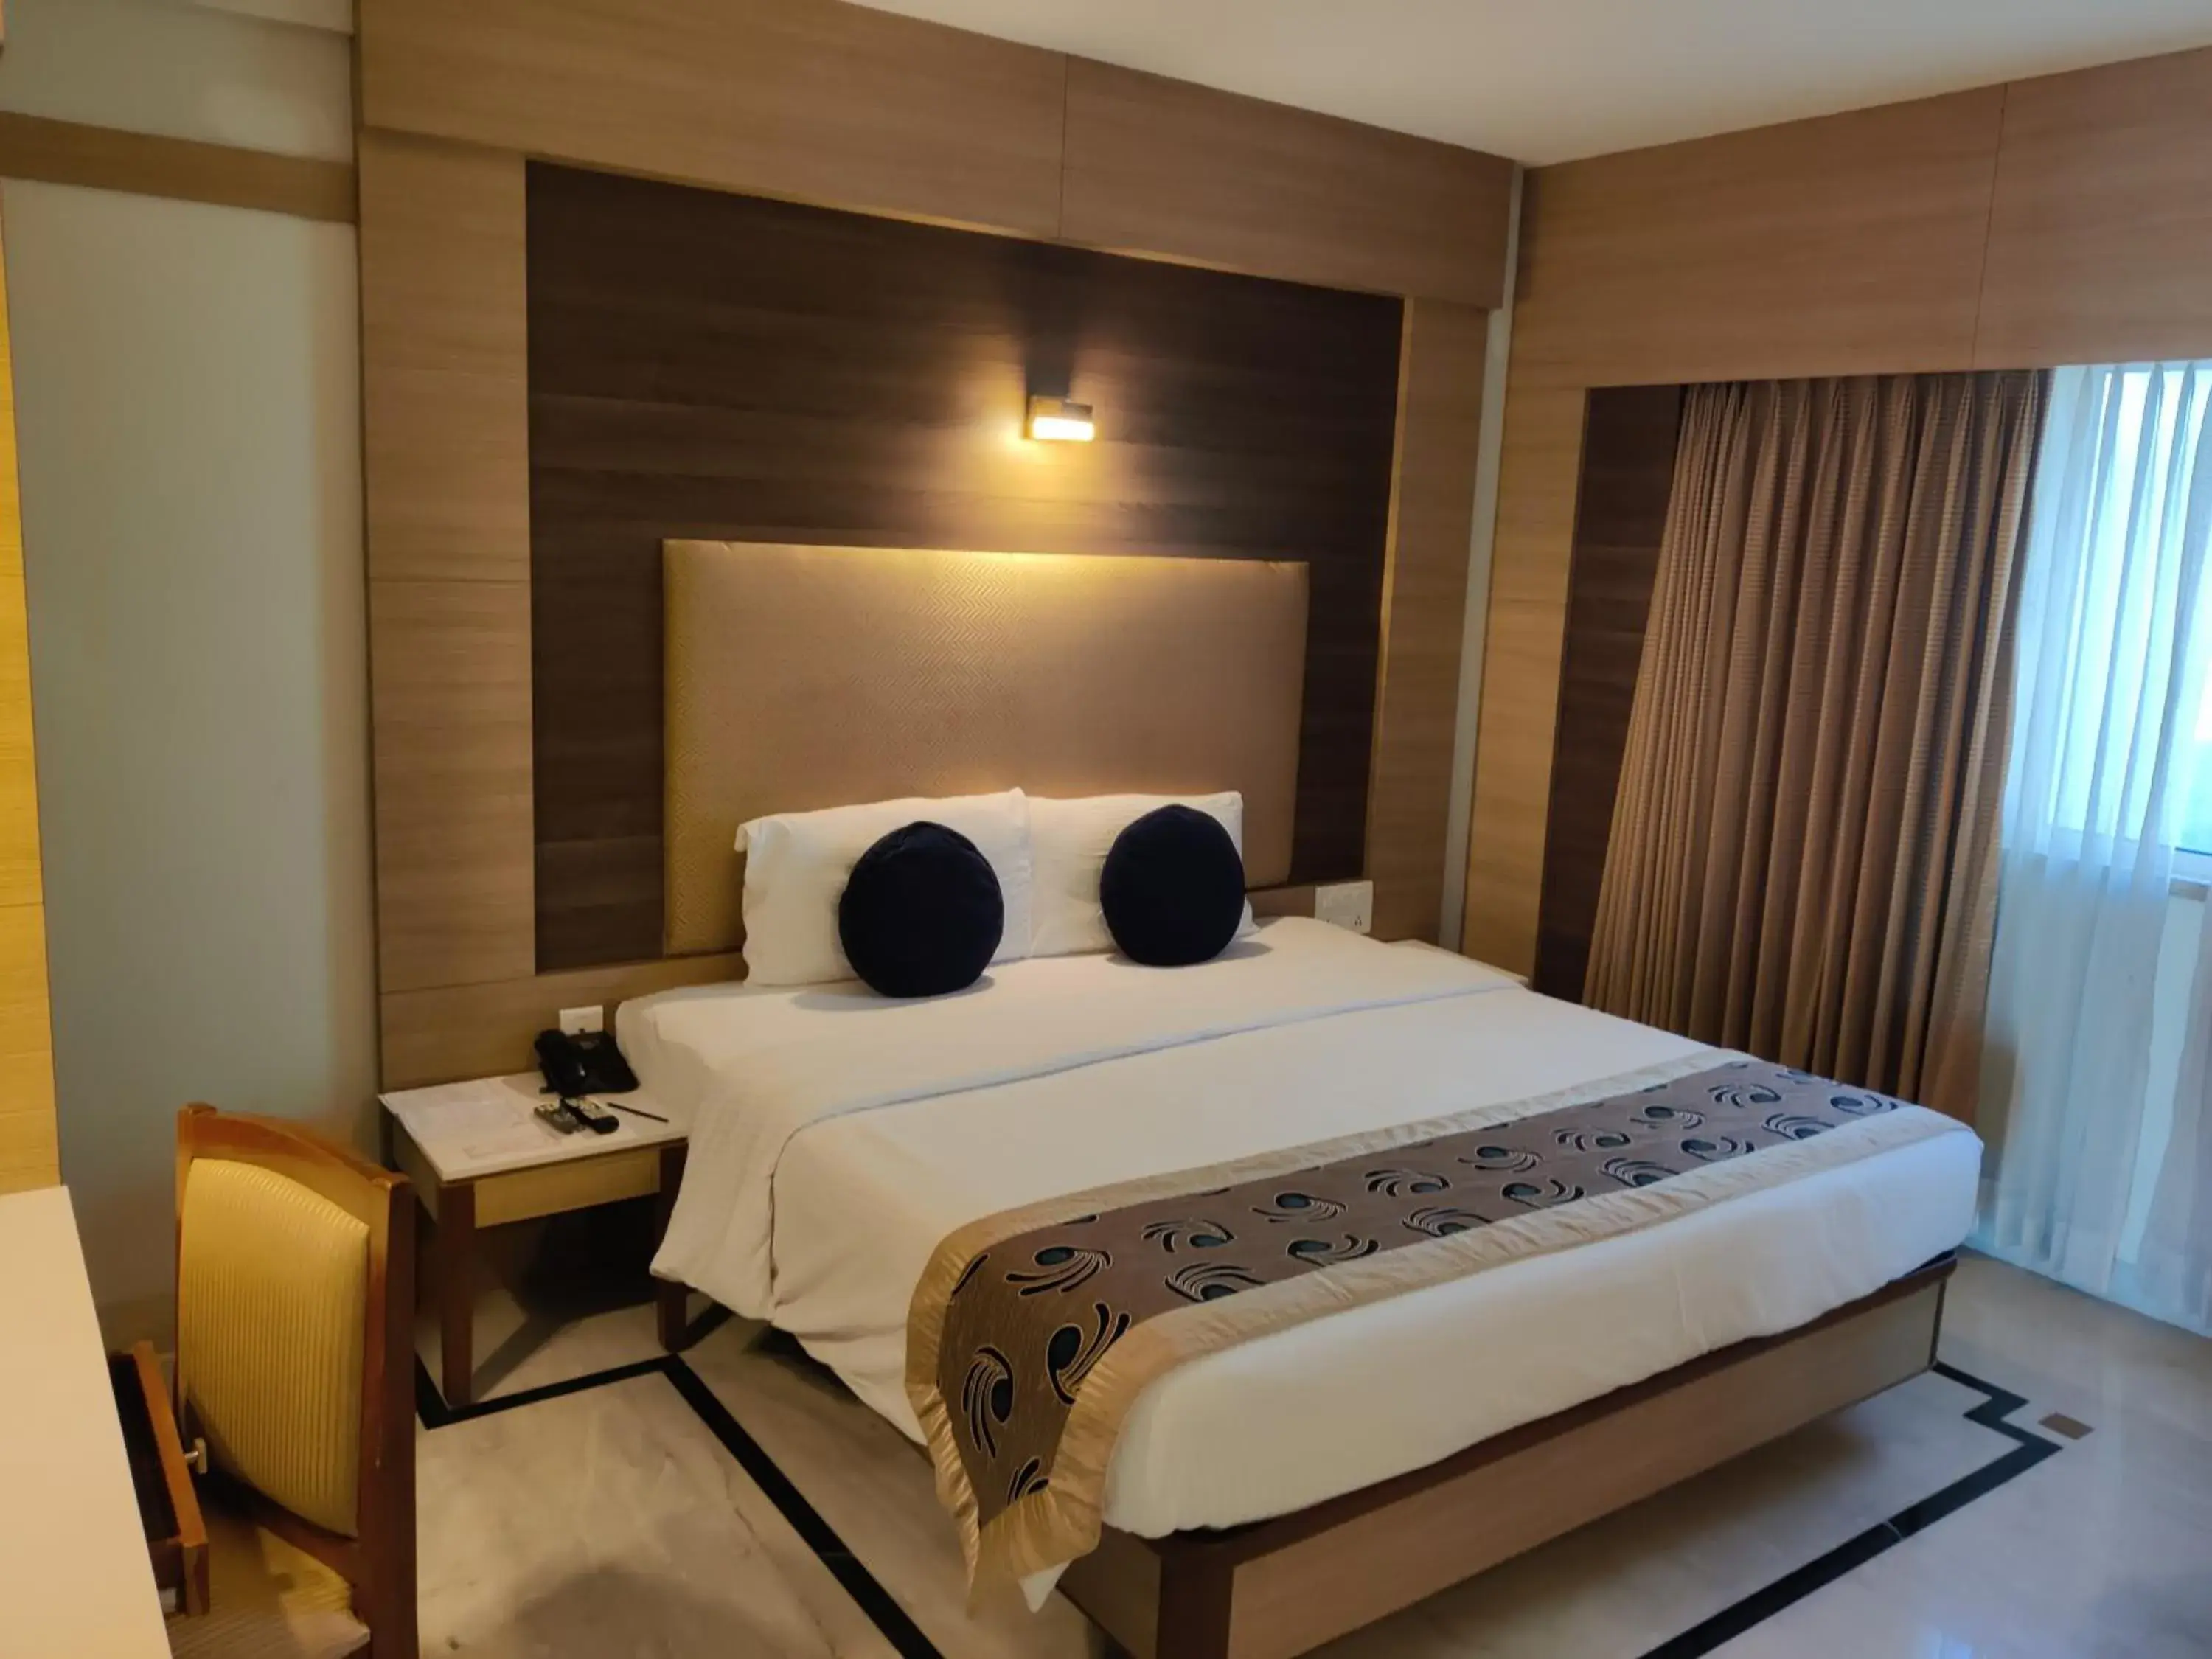 Bed in JP Hotel in Chennai